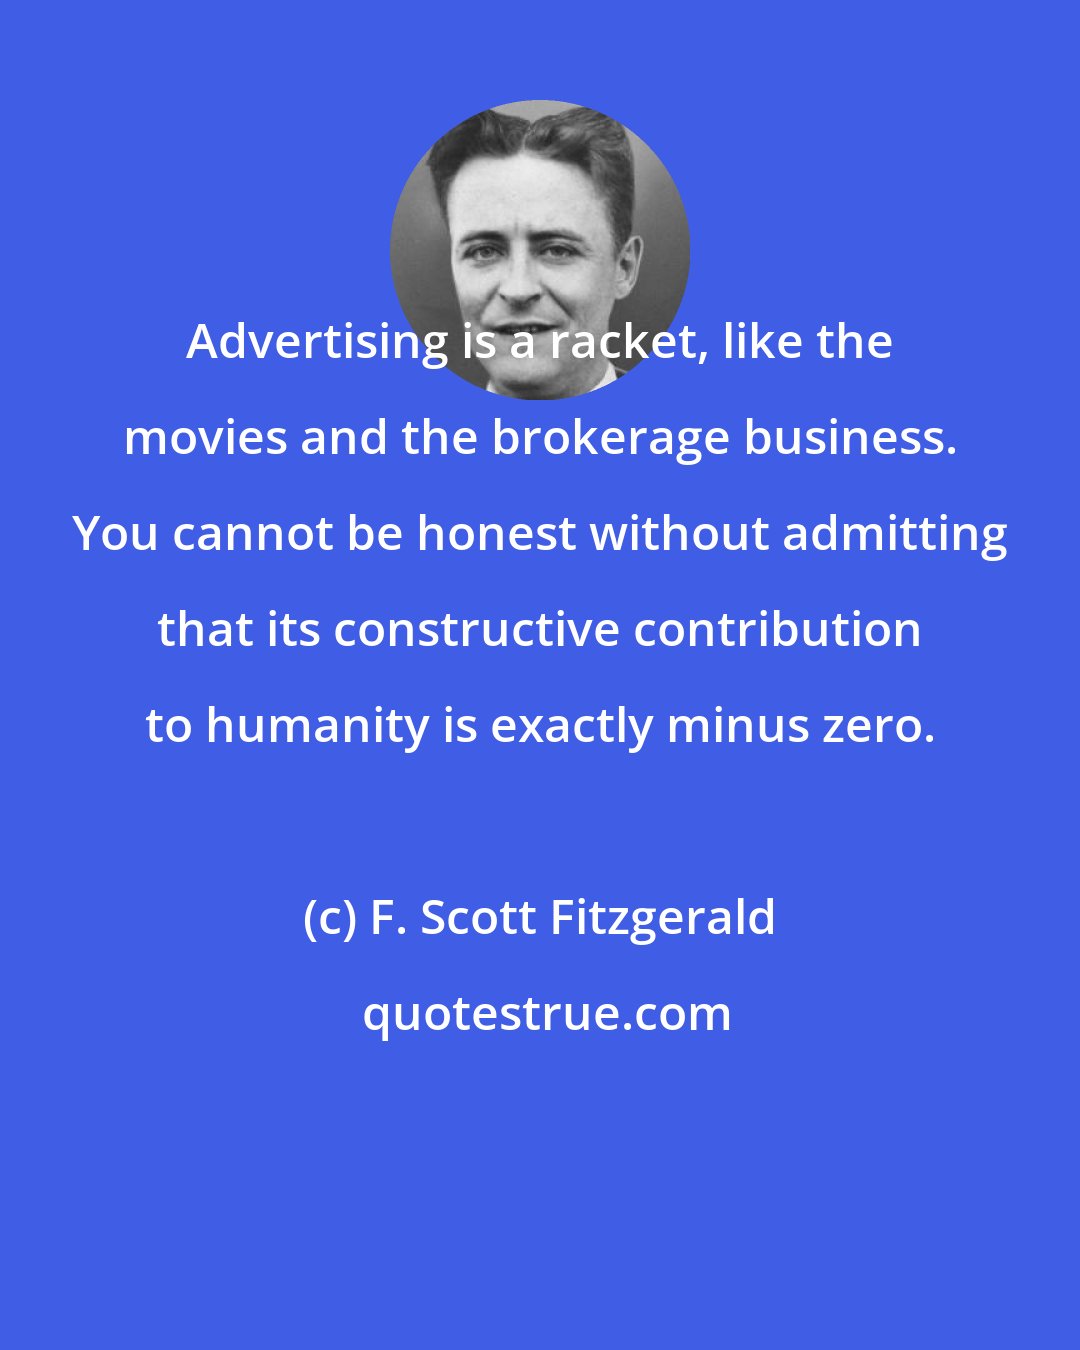 F. Scott Fitzgerald: Advertising is a racket, like the movies and the brokerage business. You cannot be honest without admitting that its constructive contribution to humanity is exactly minus zero.